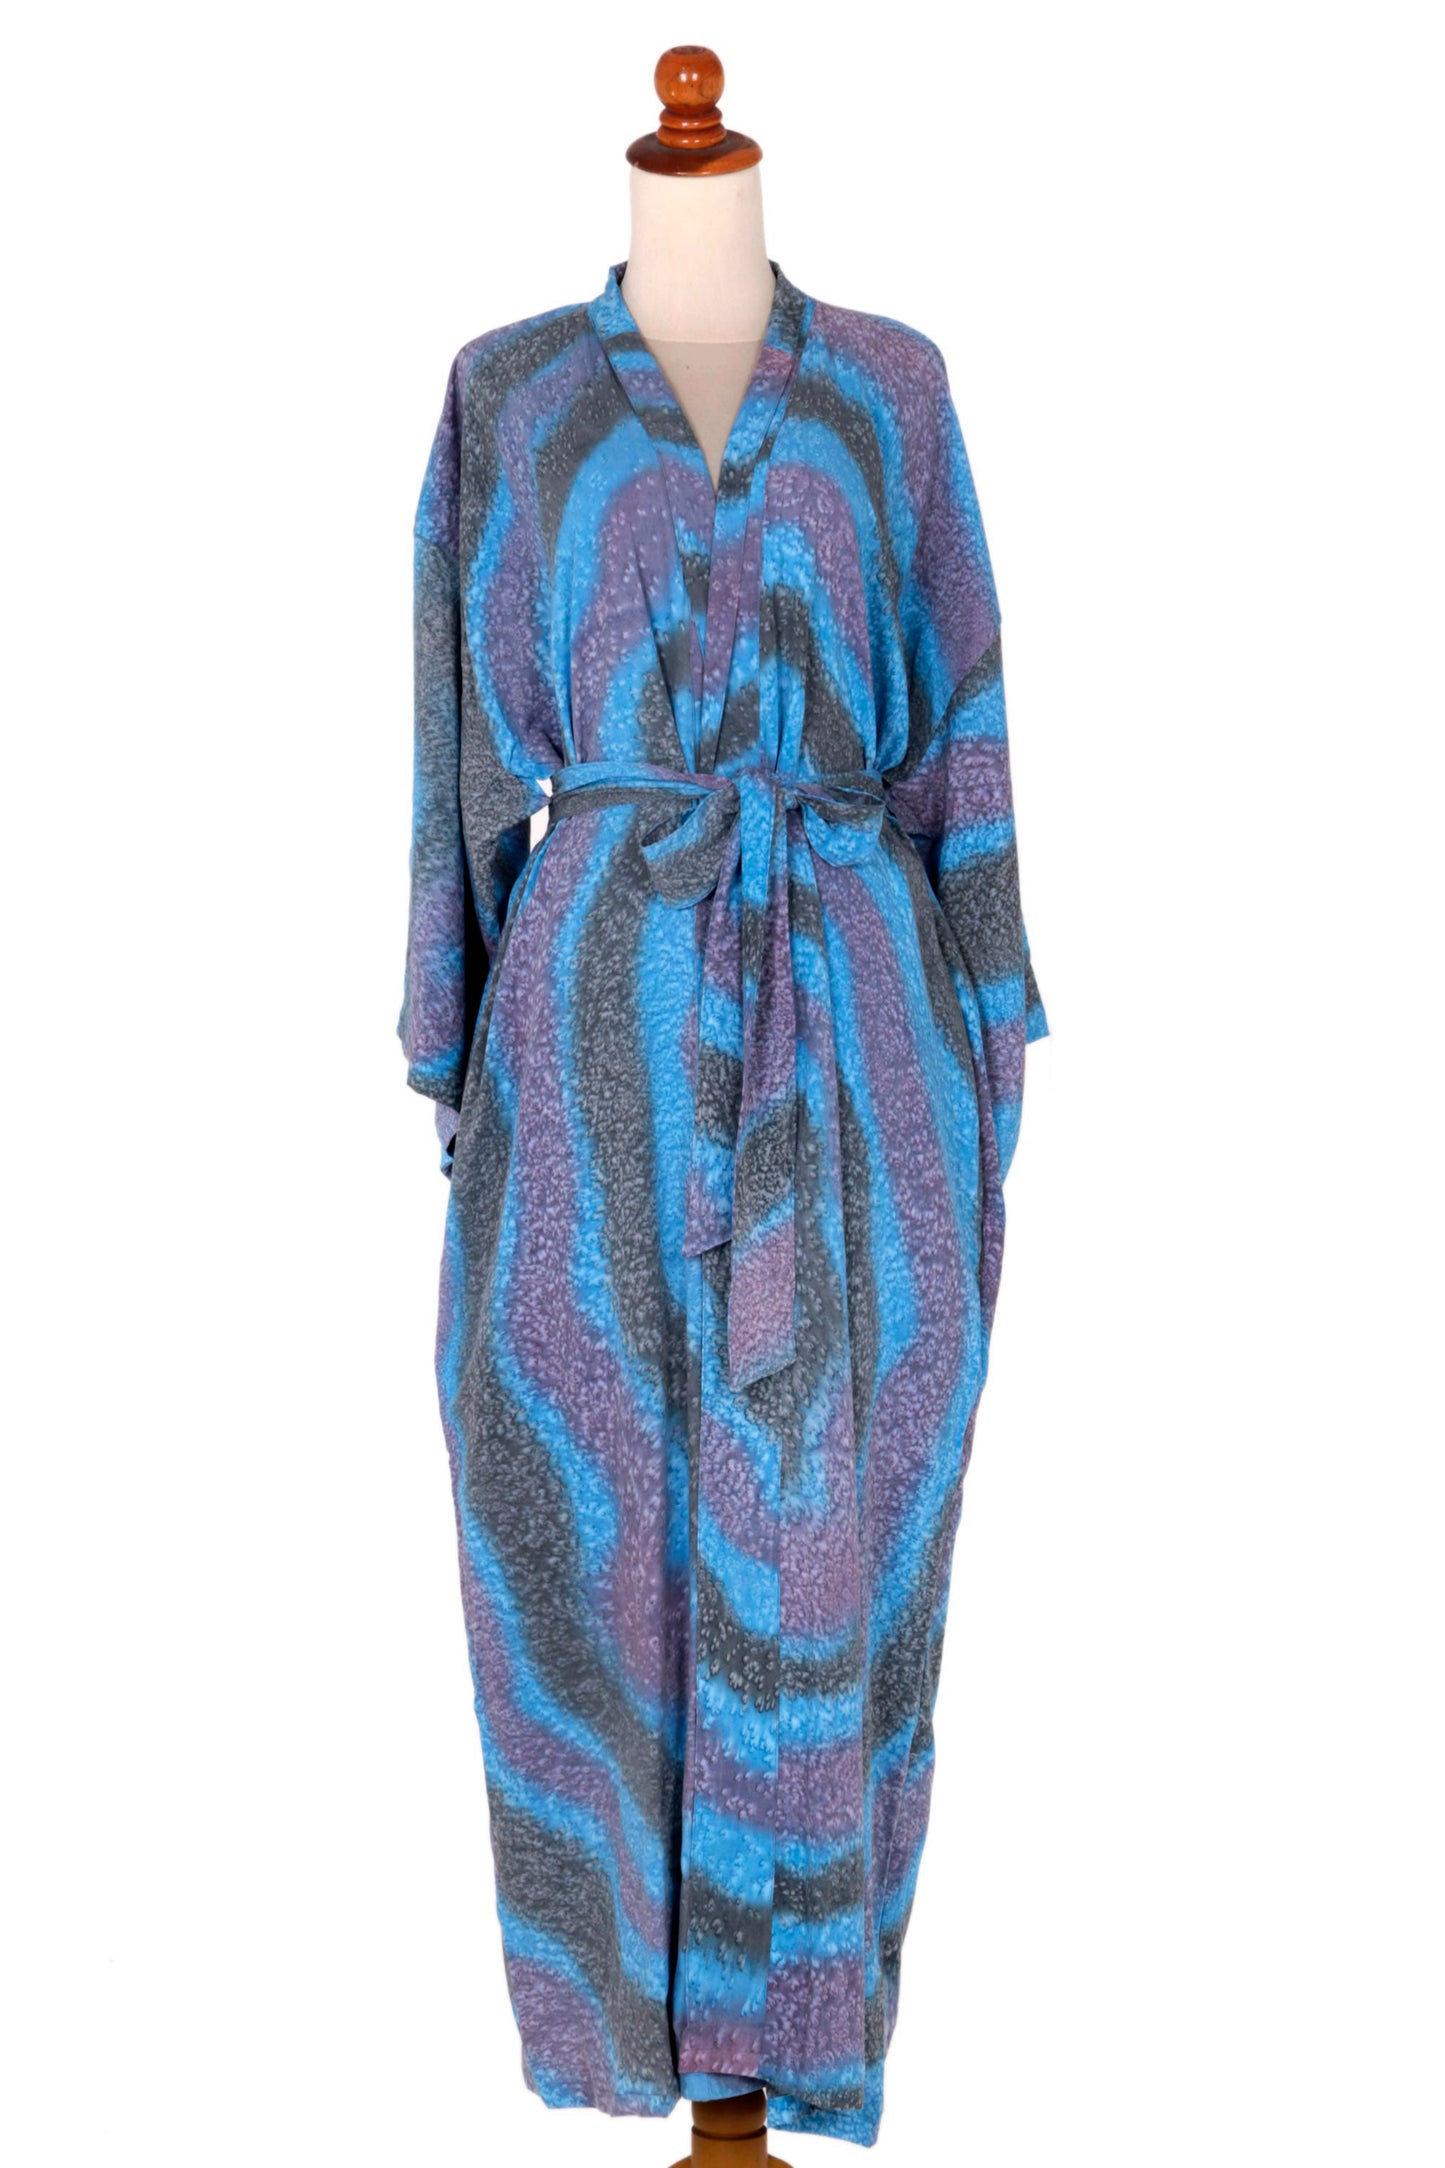 Ocean Reef Women's Blue 100% Rayon Robe from Indonesia